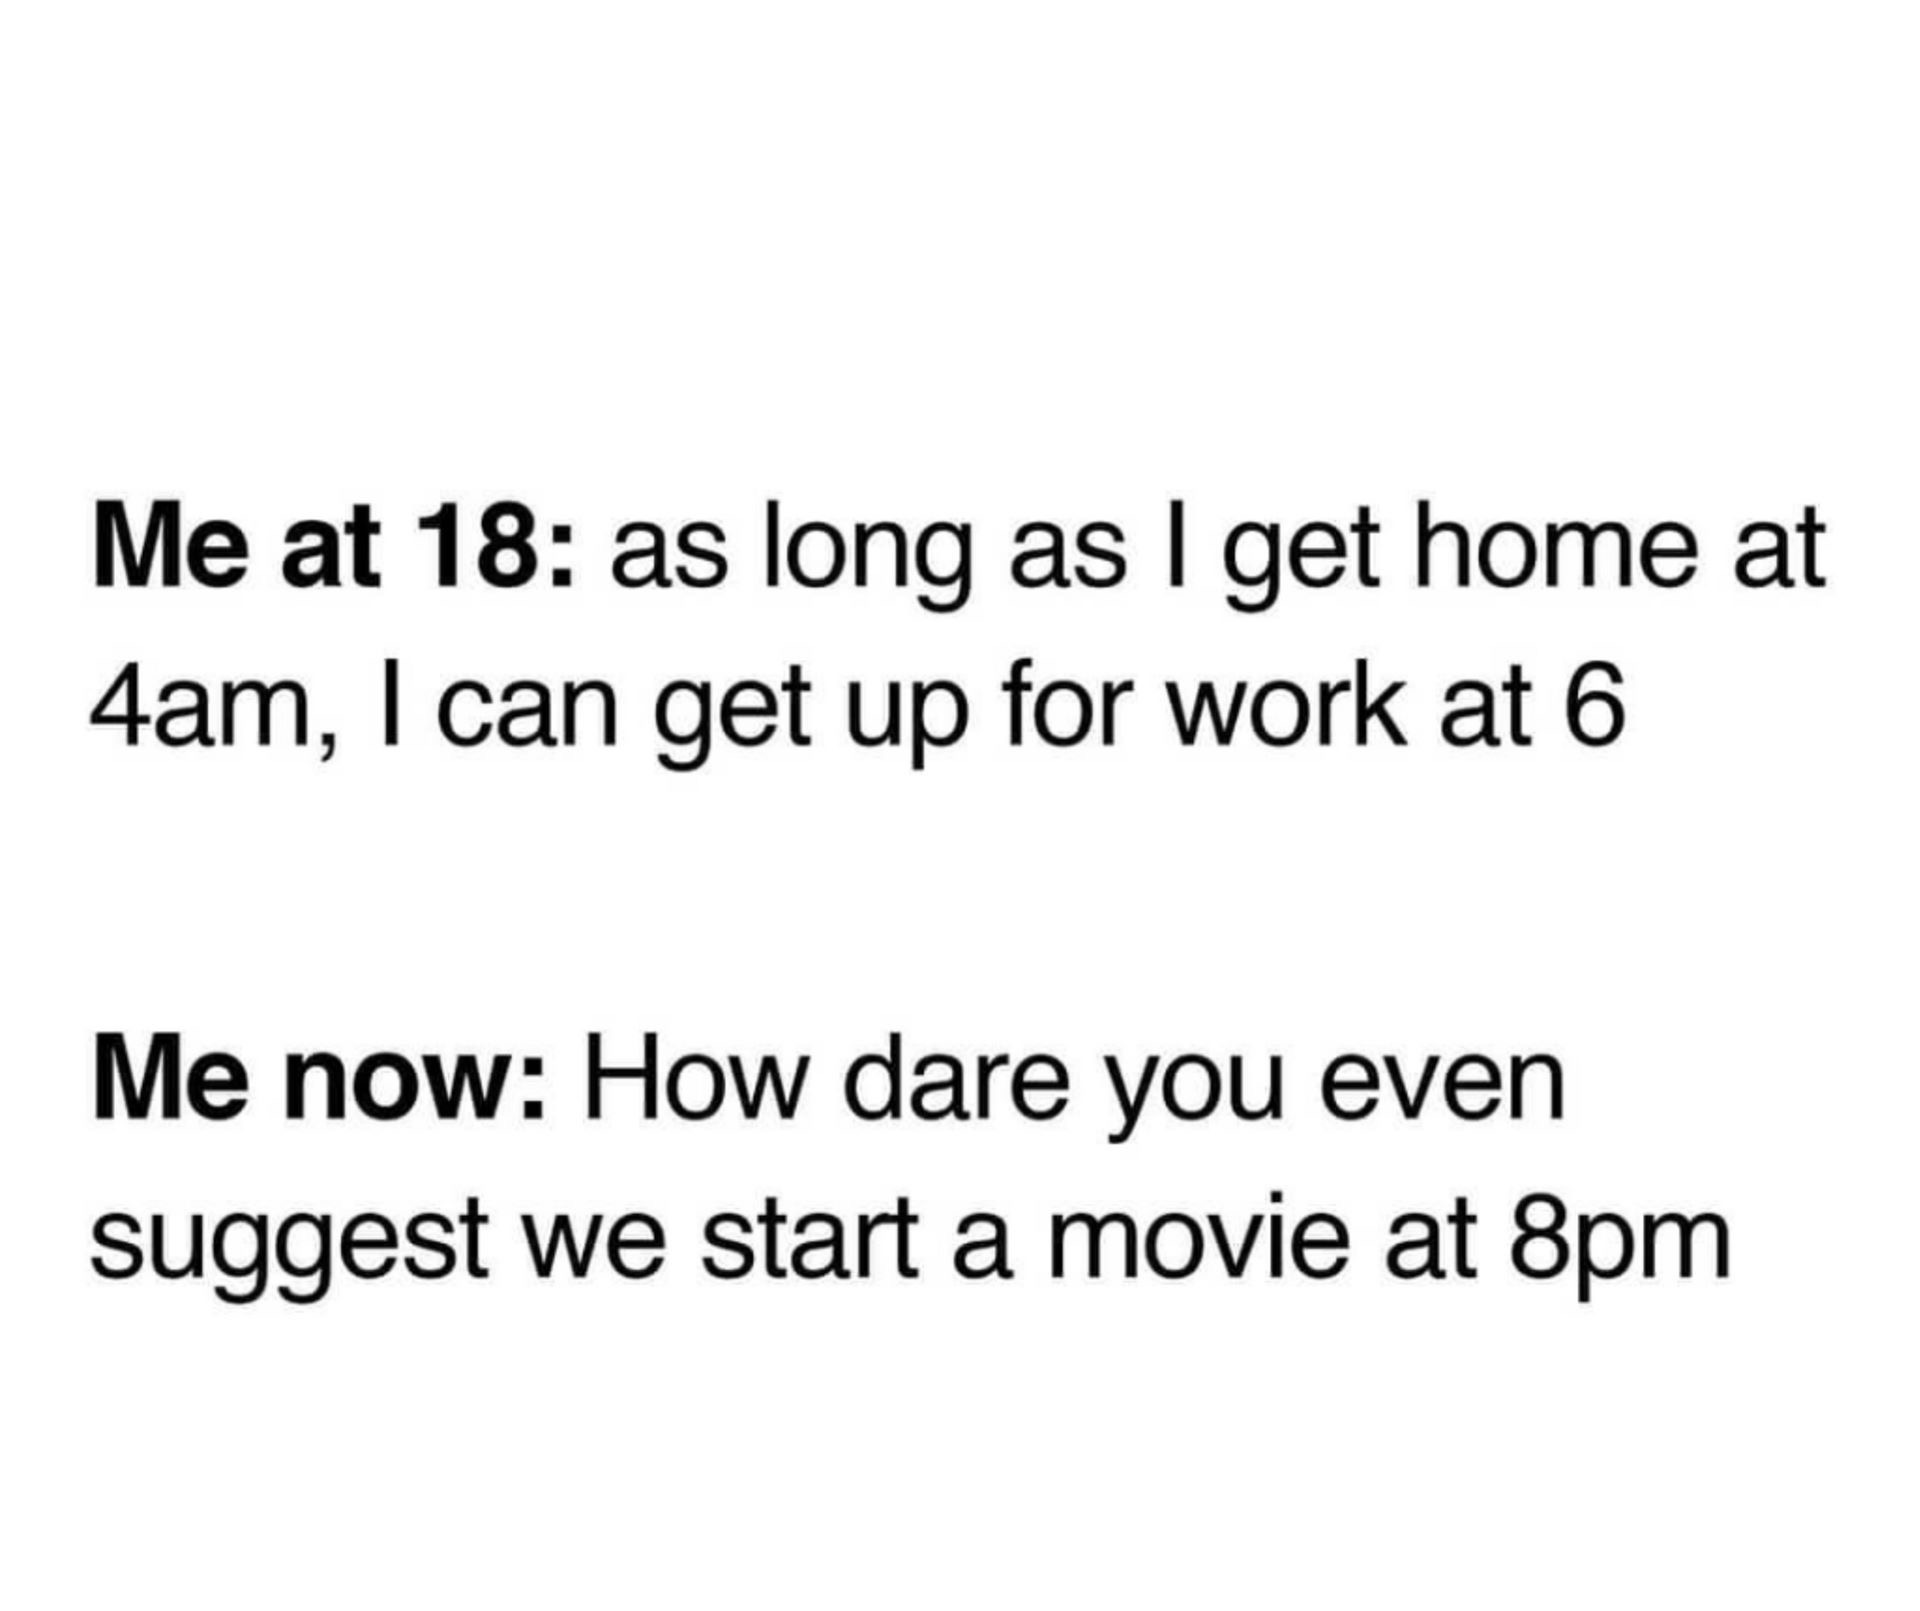 number - Me at 18 as long as I get home at 4am, I can get up for work at 6 Me now How dare you even suggest we start a movie at 8pm